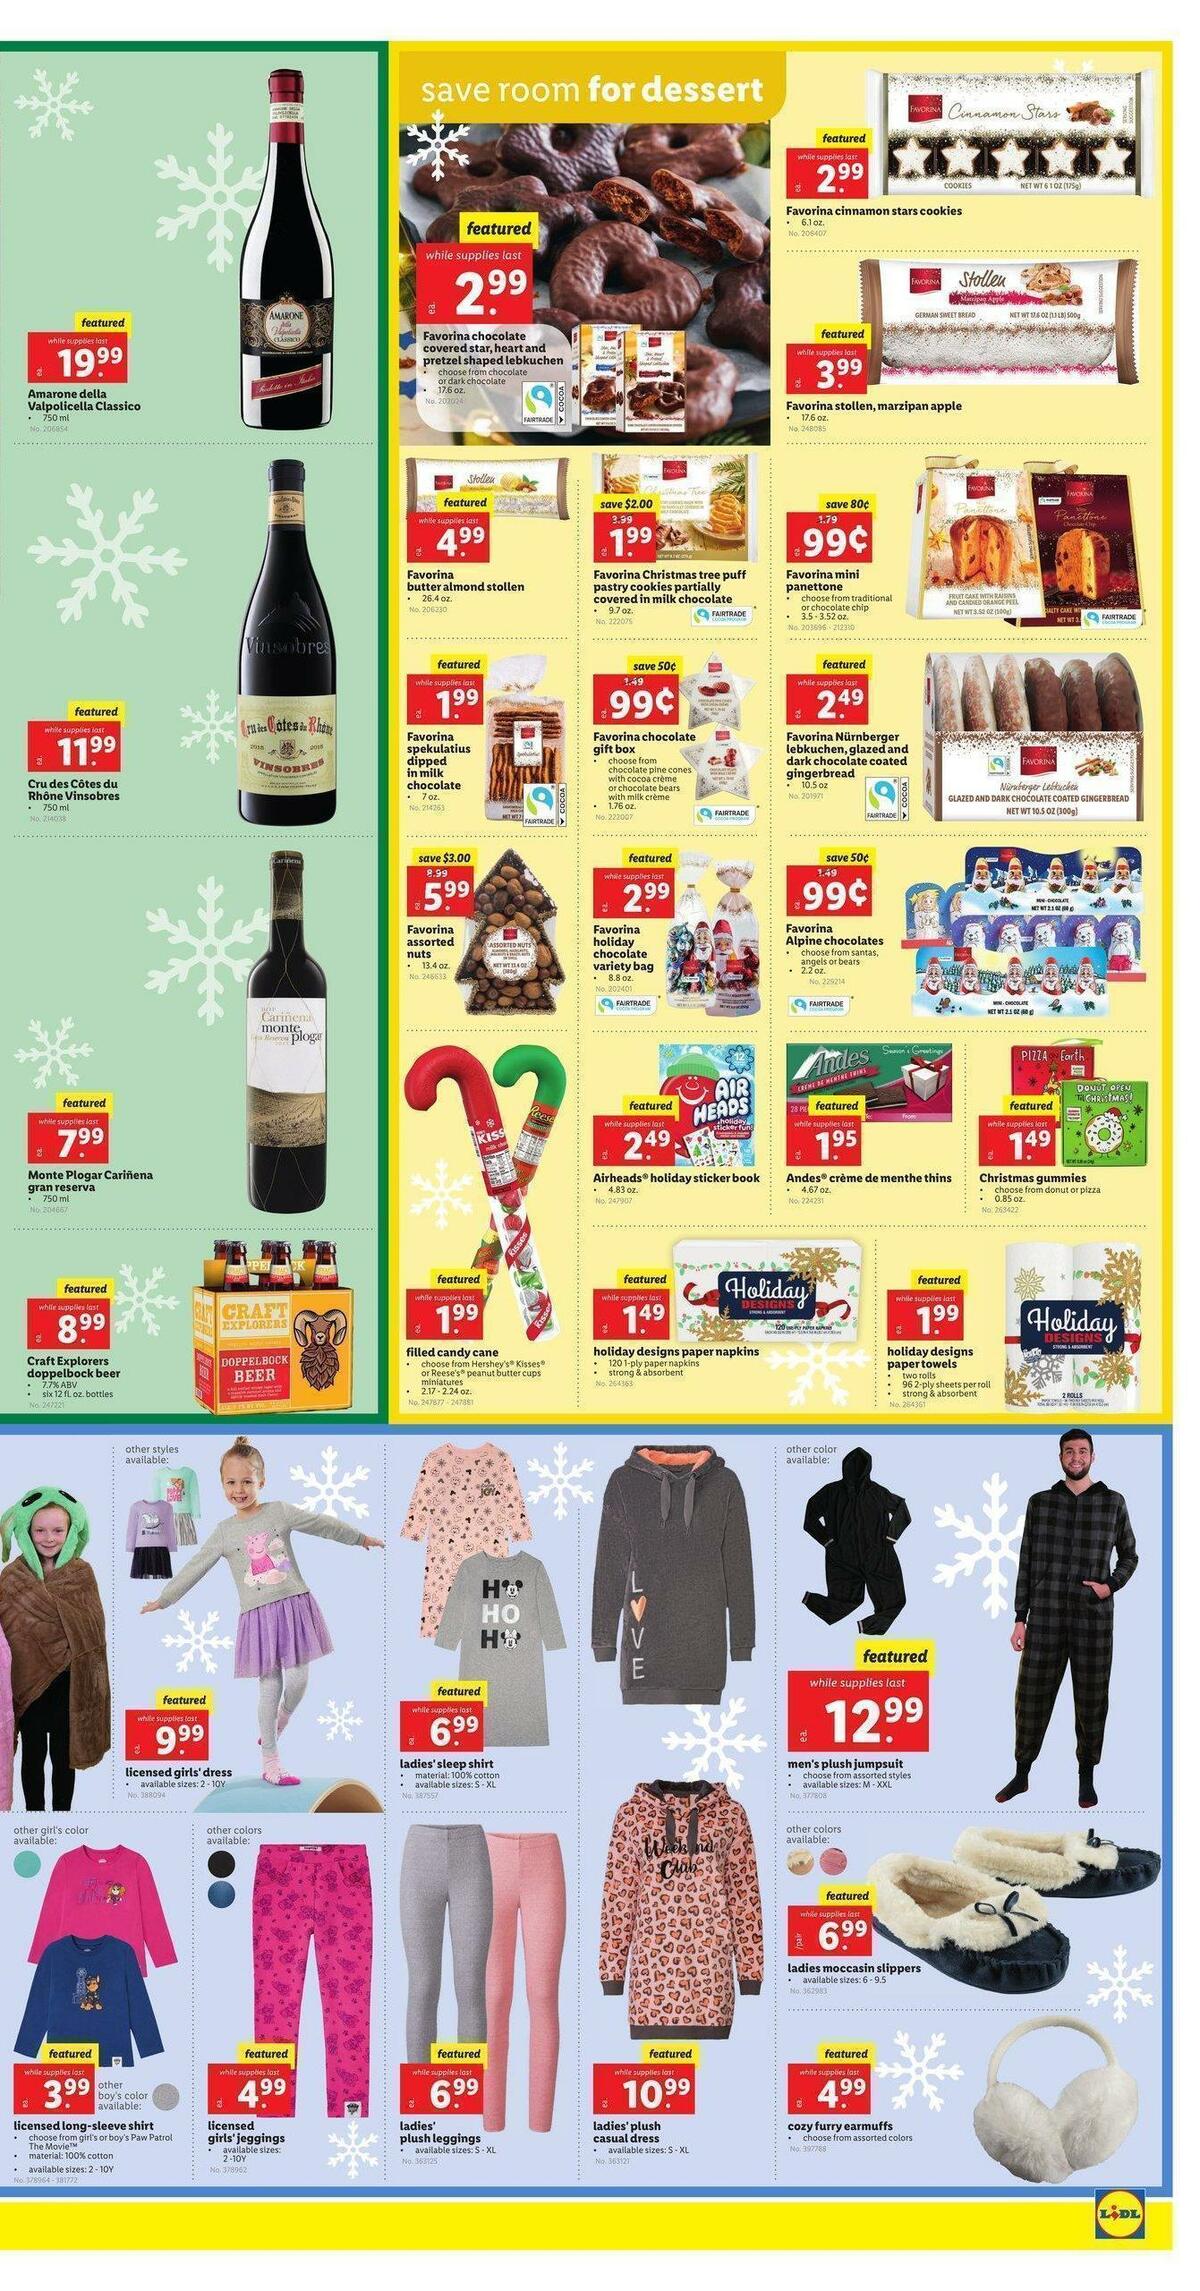 LIDL Weekly Ad from December 15